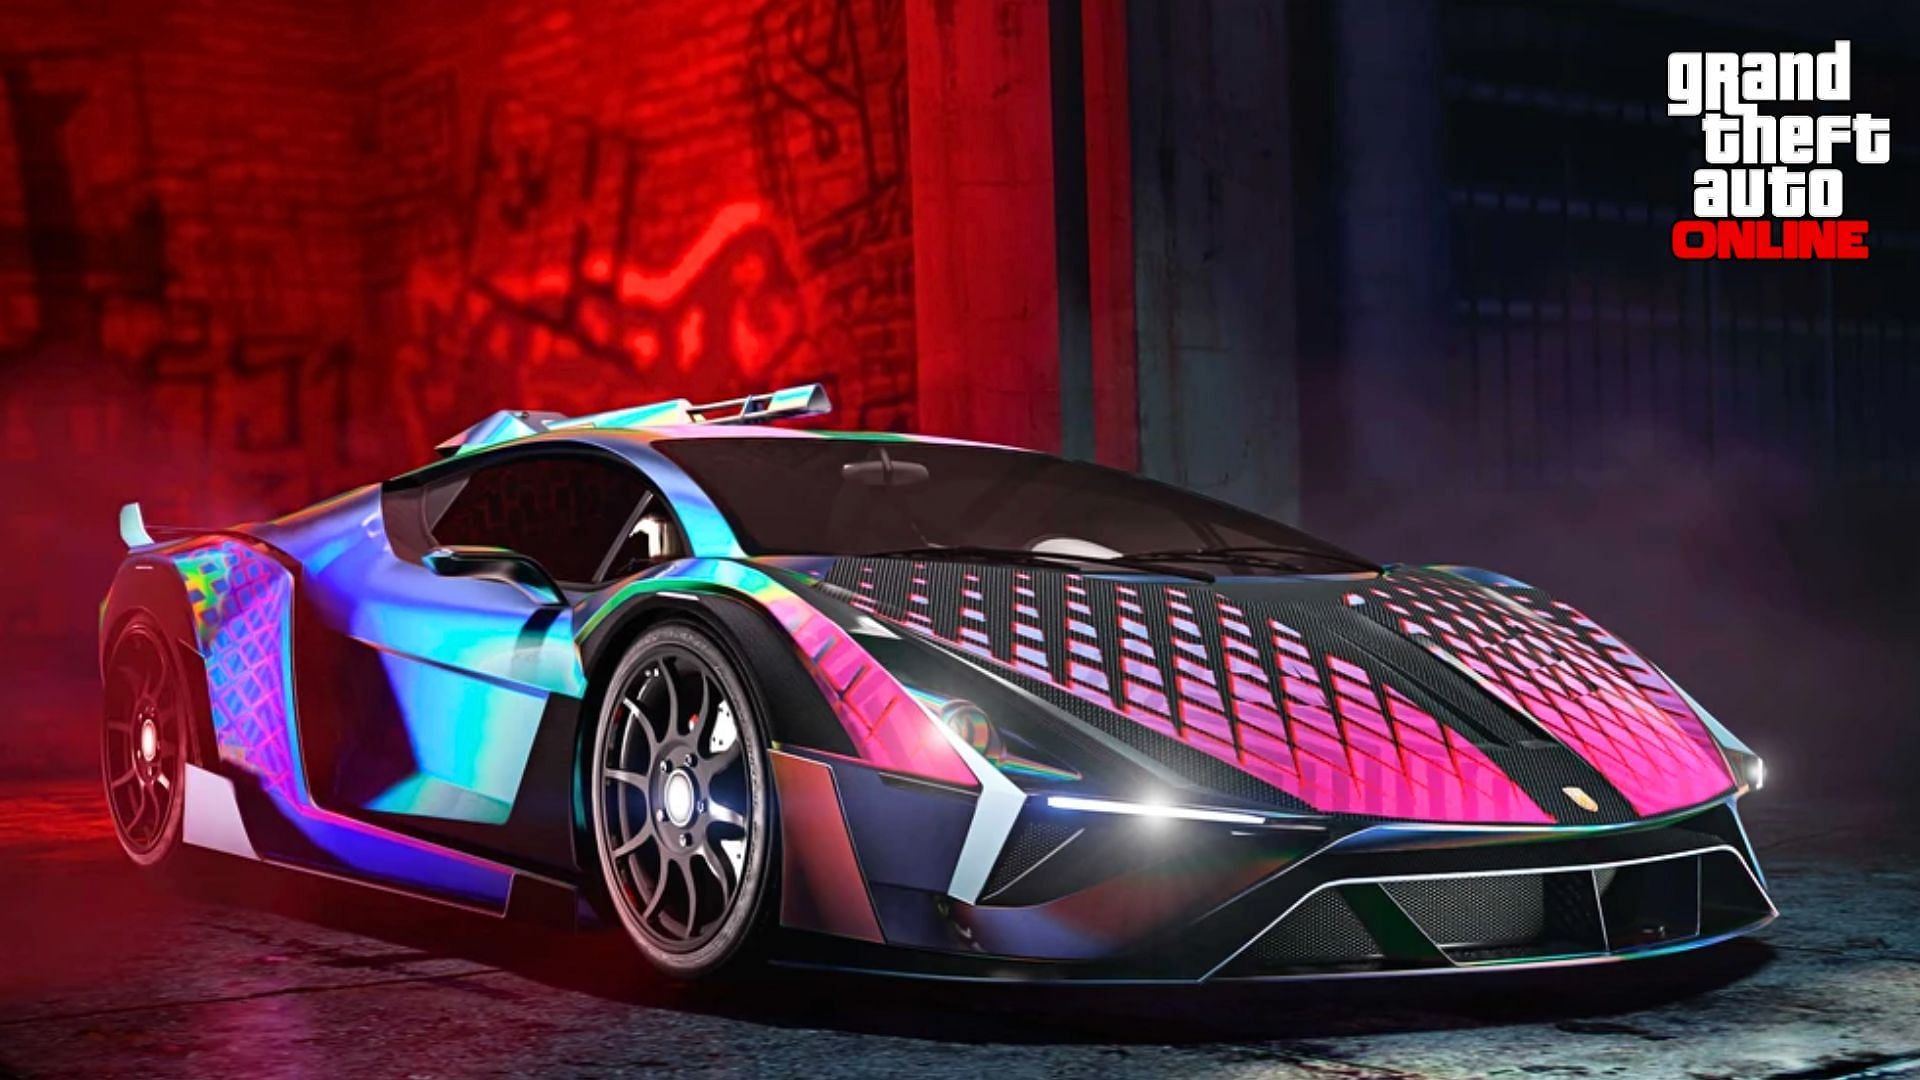 The HSW Weaponized Ignus in its full glory in GTA Online (Image via Rockstar Games)